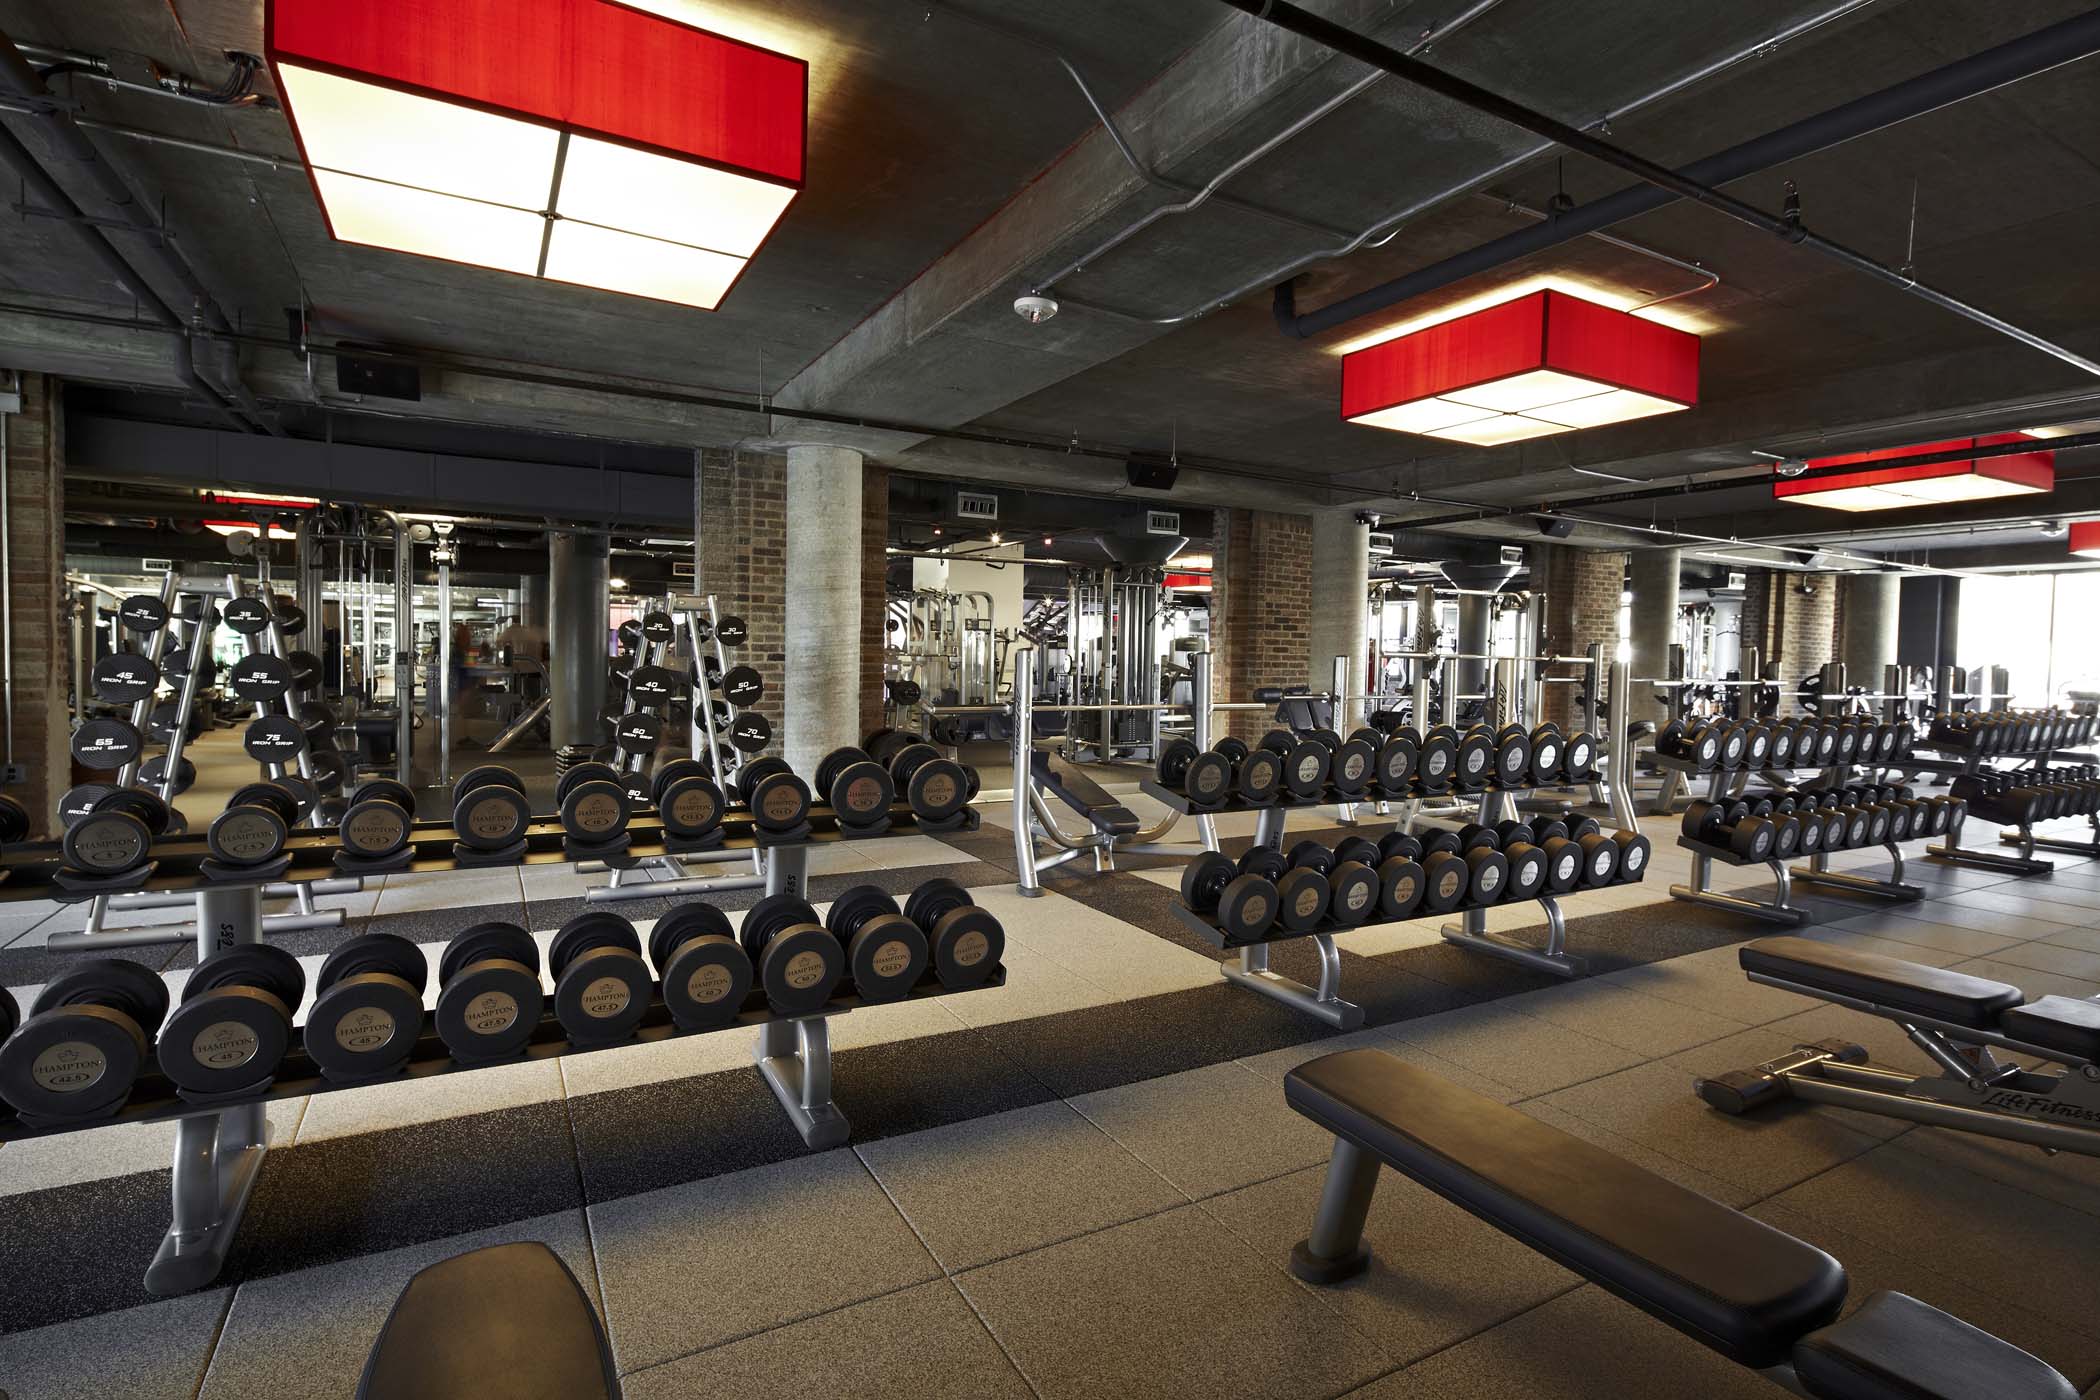 VIDA Fitness to open gym with swimming pool this spring in Reston